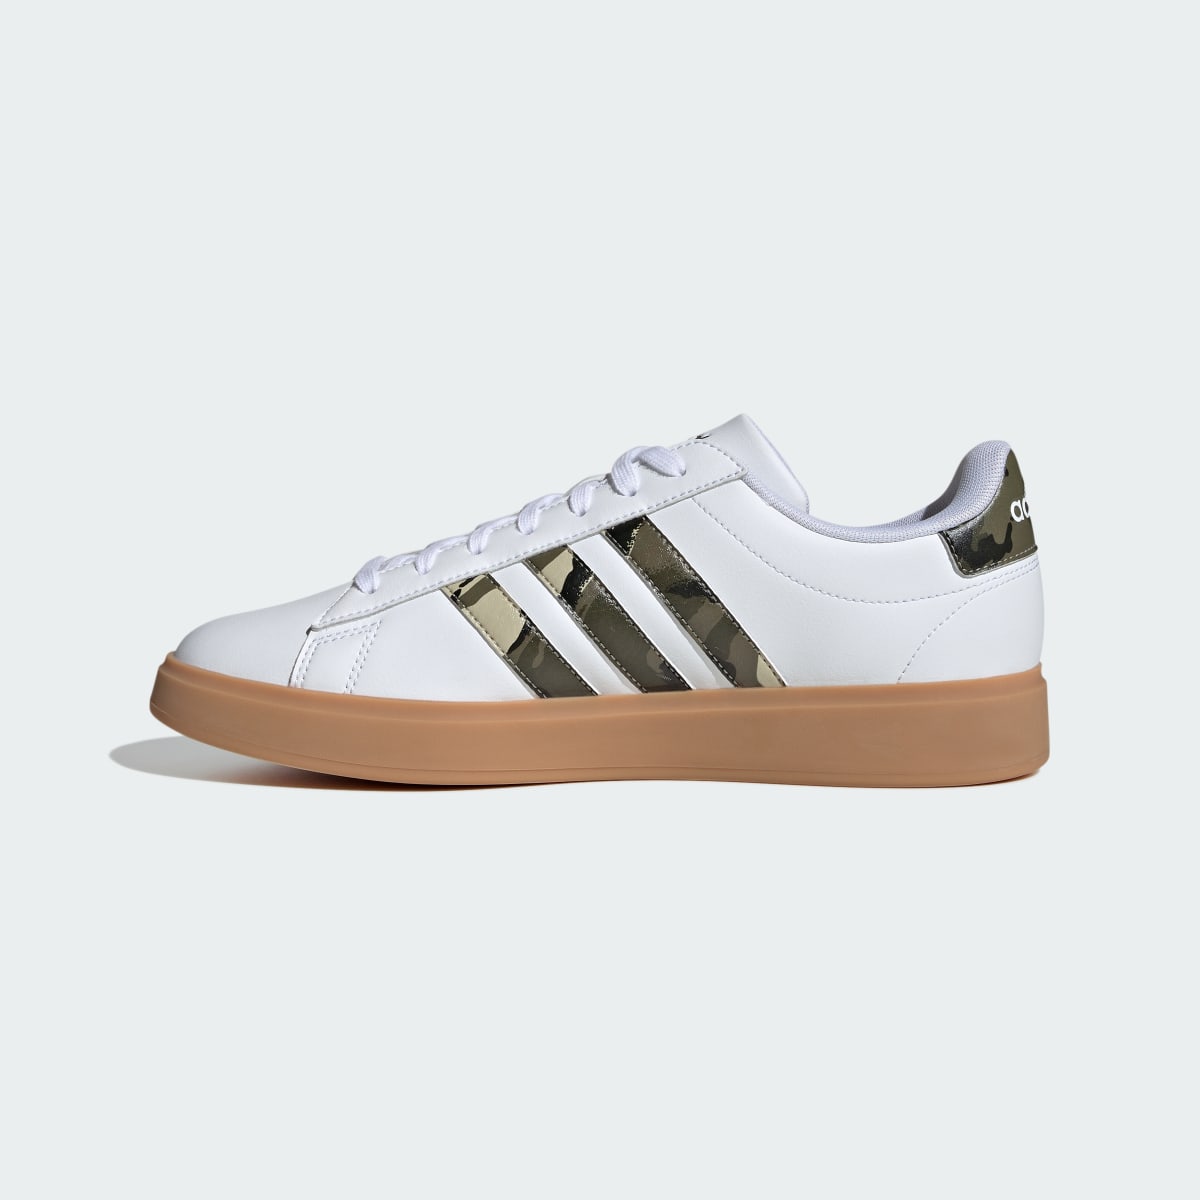 Adidas Grand Court 2.0 Shoes. 7